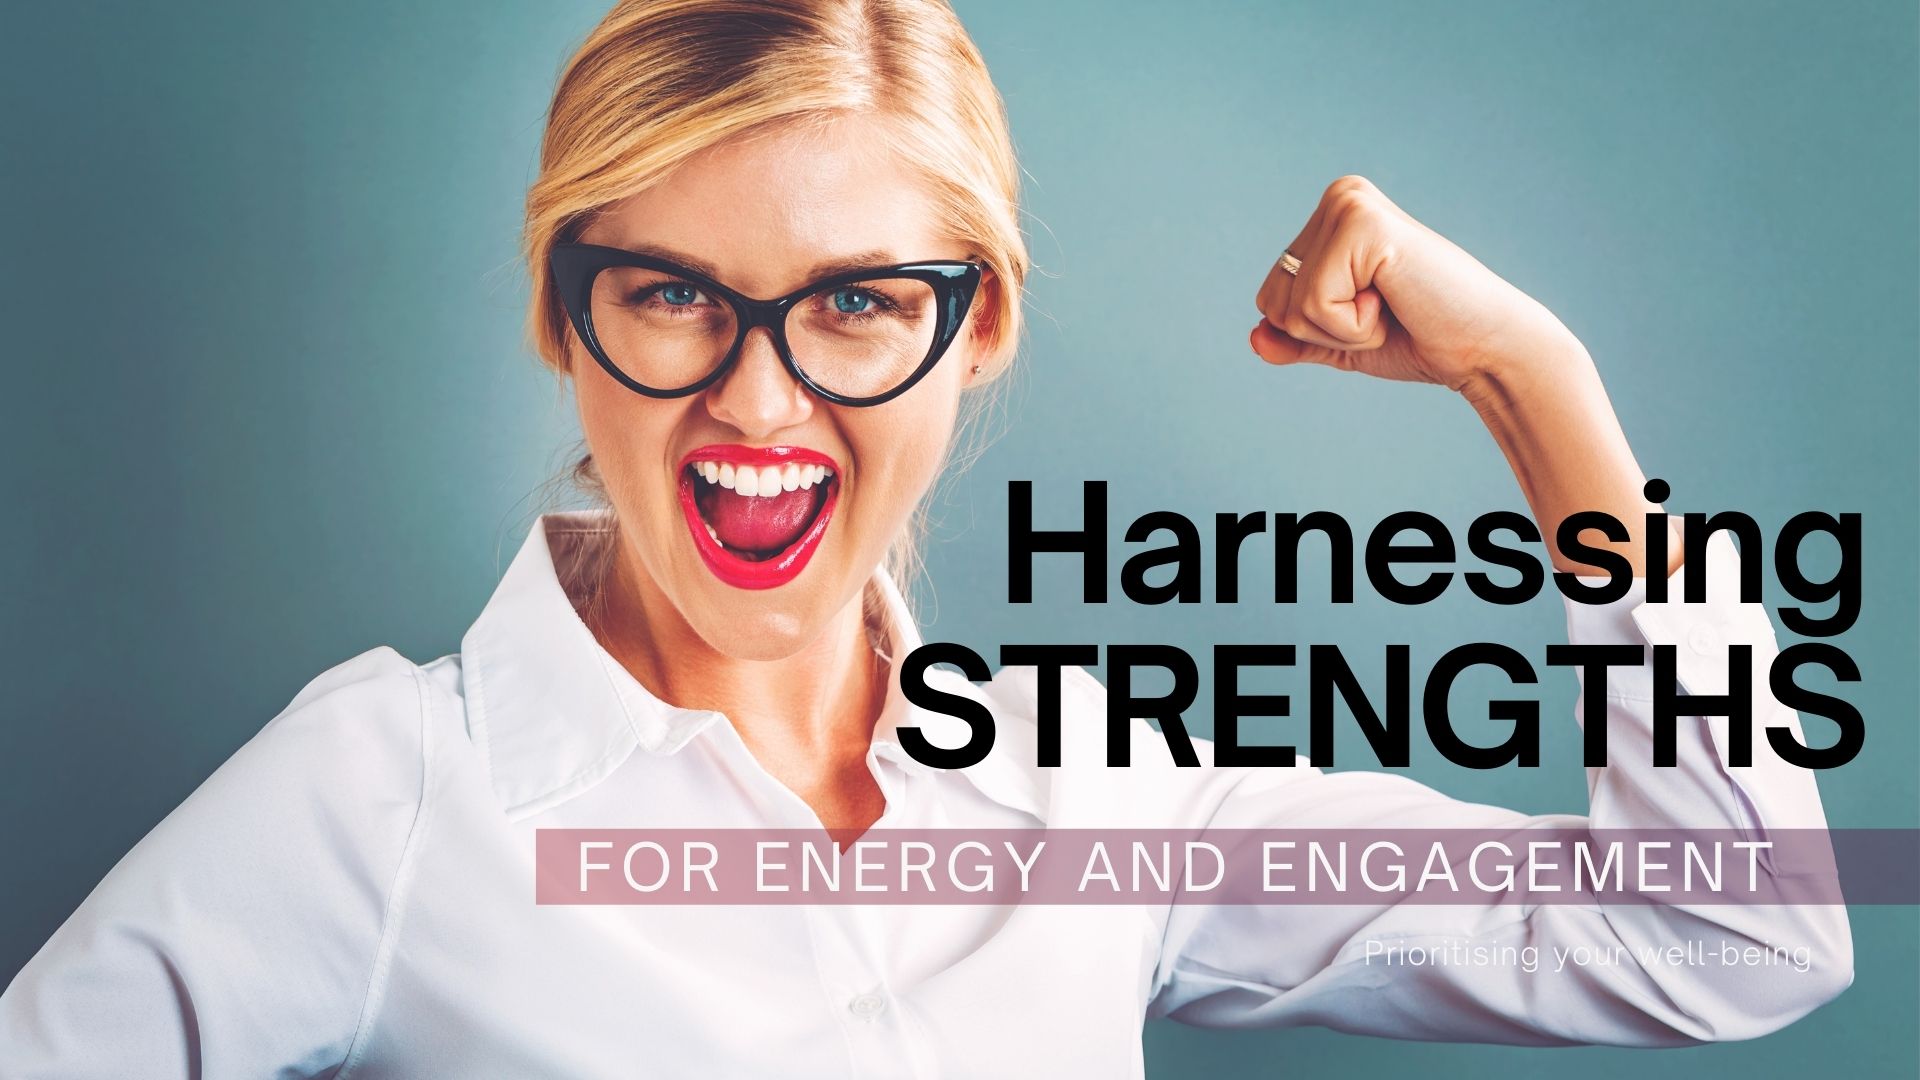 harnessing strengths for energy and engagement